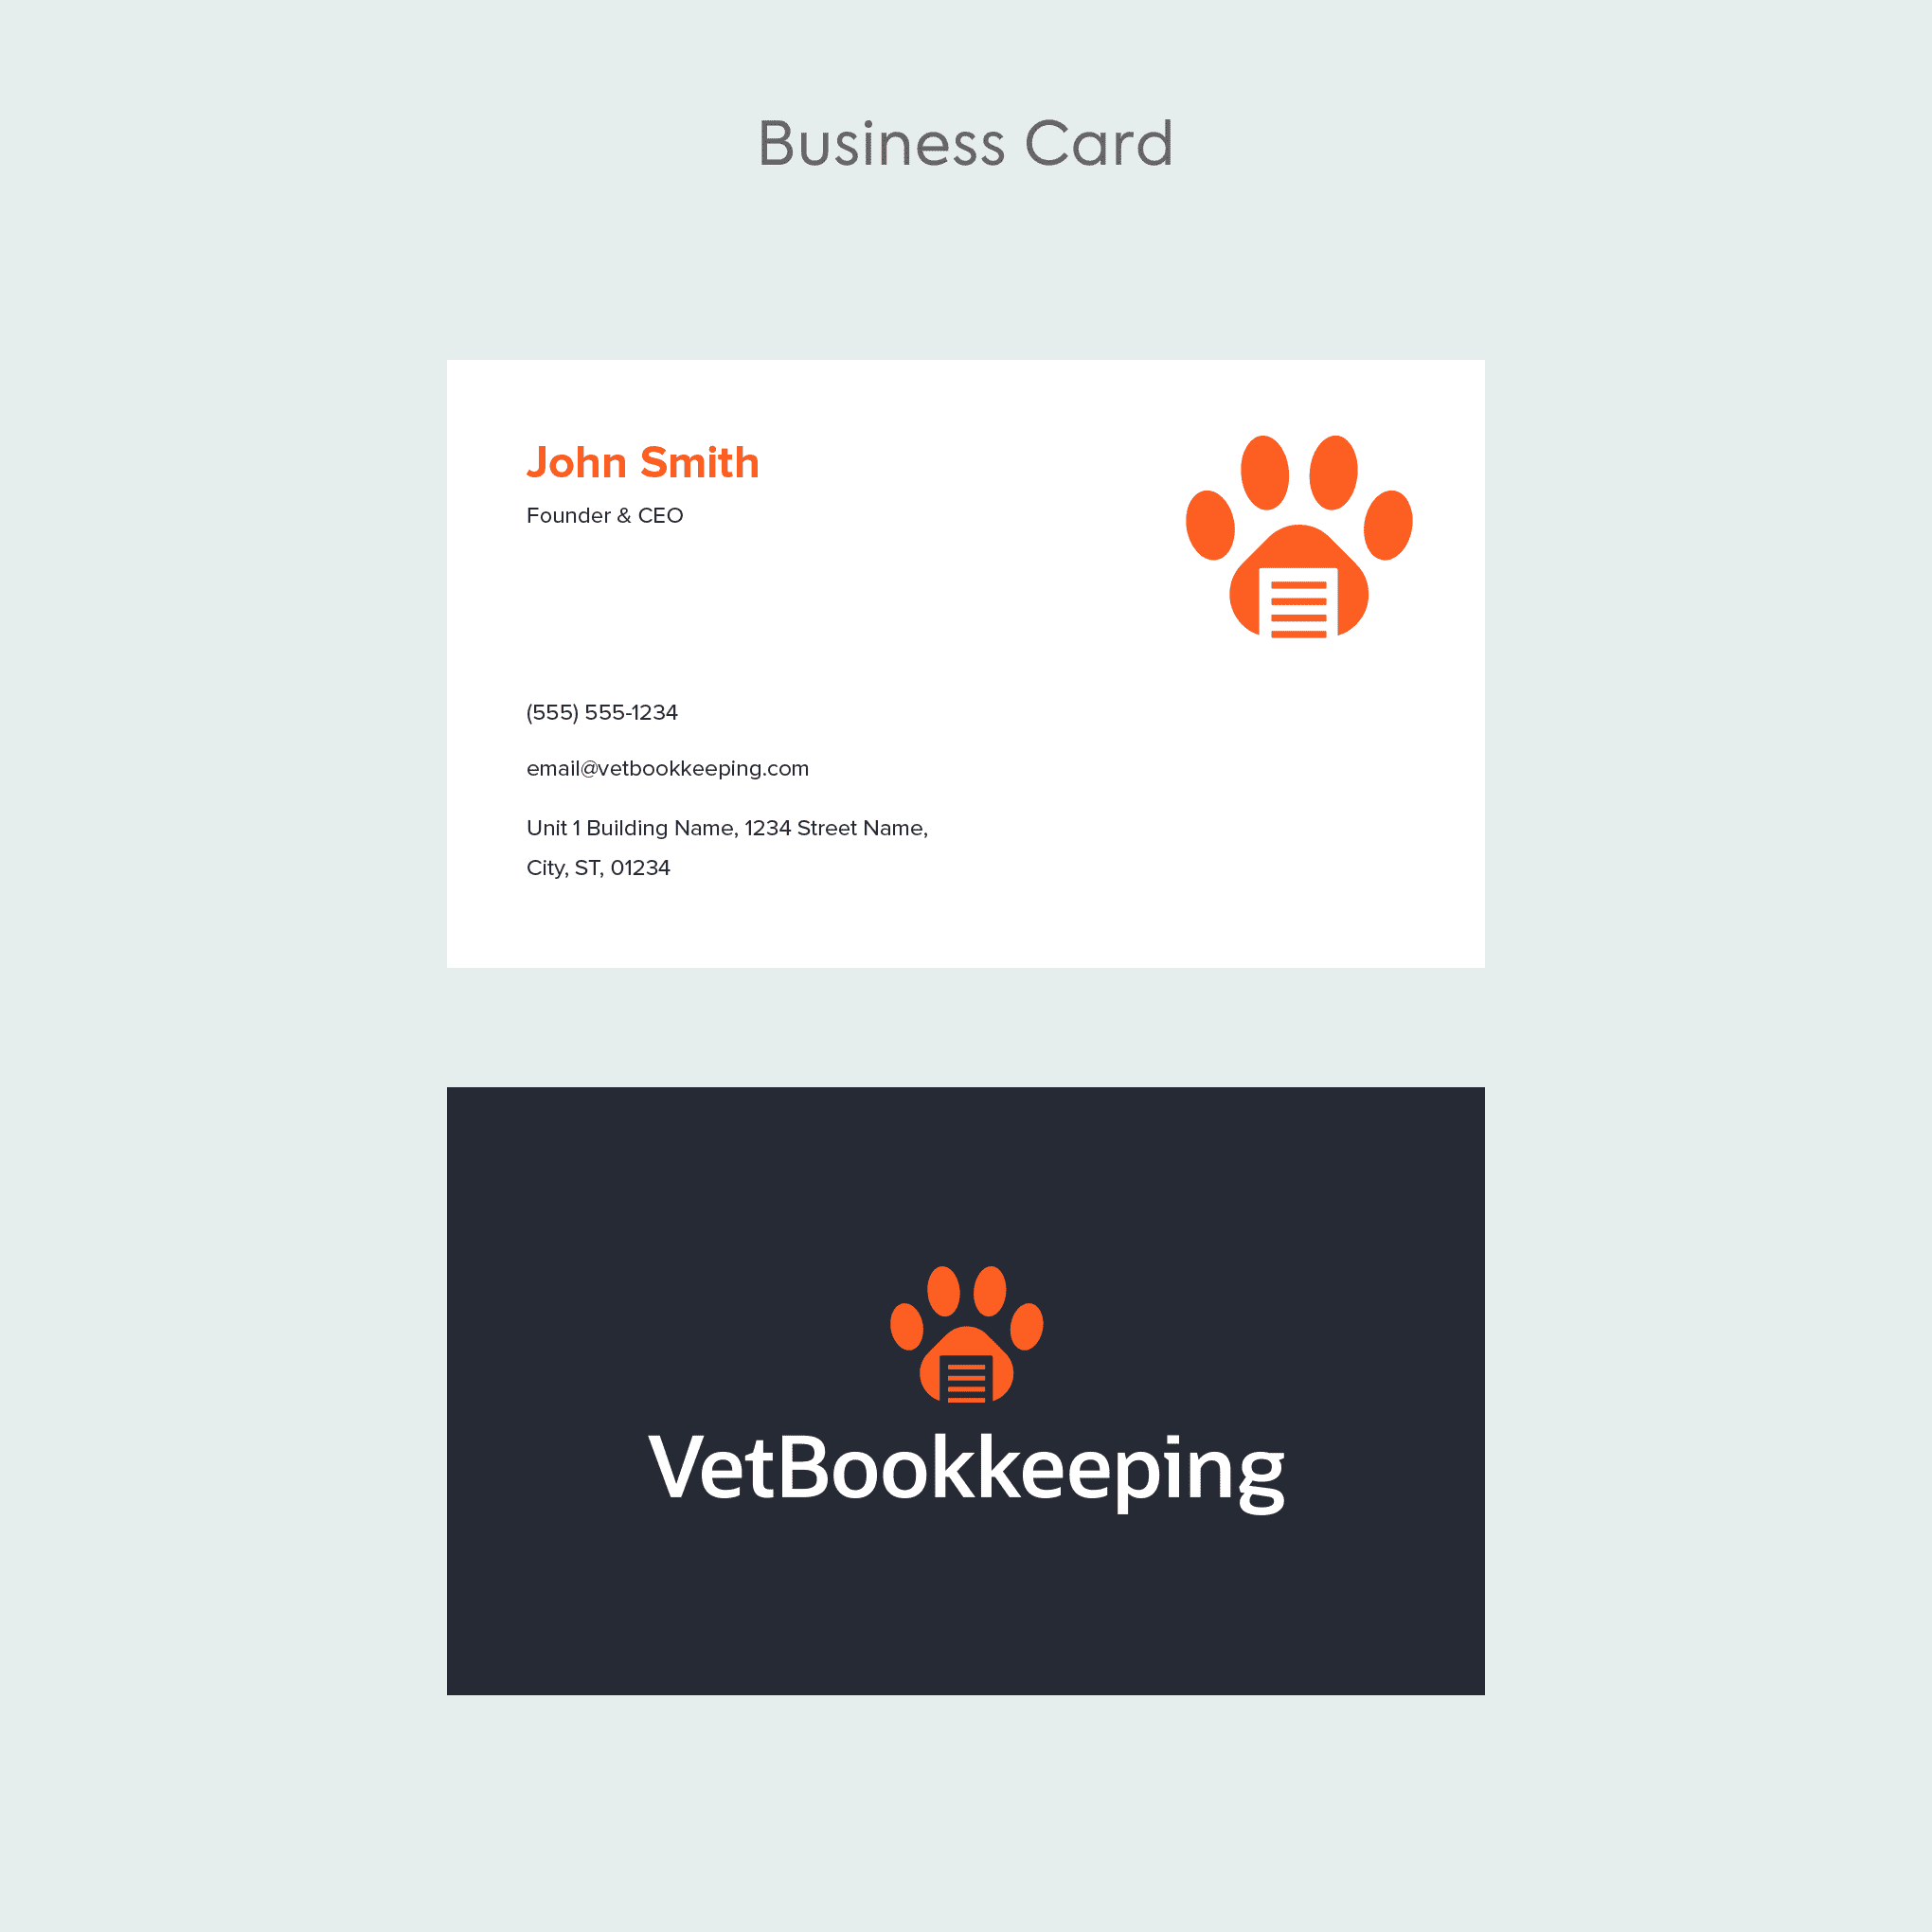 04 - Business Card Template (9)